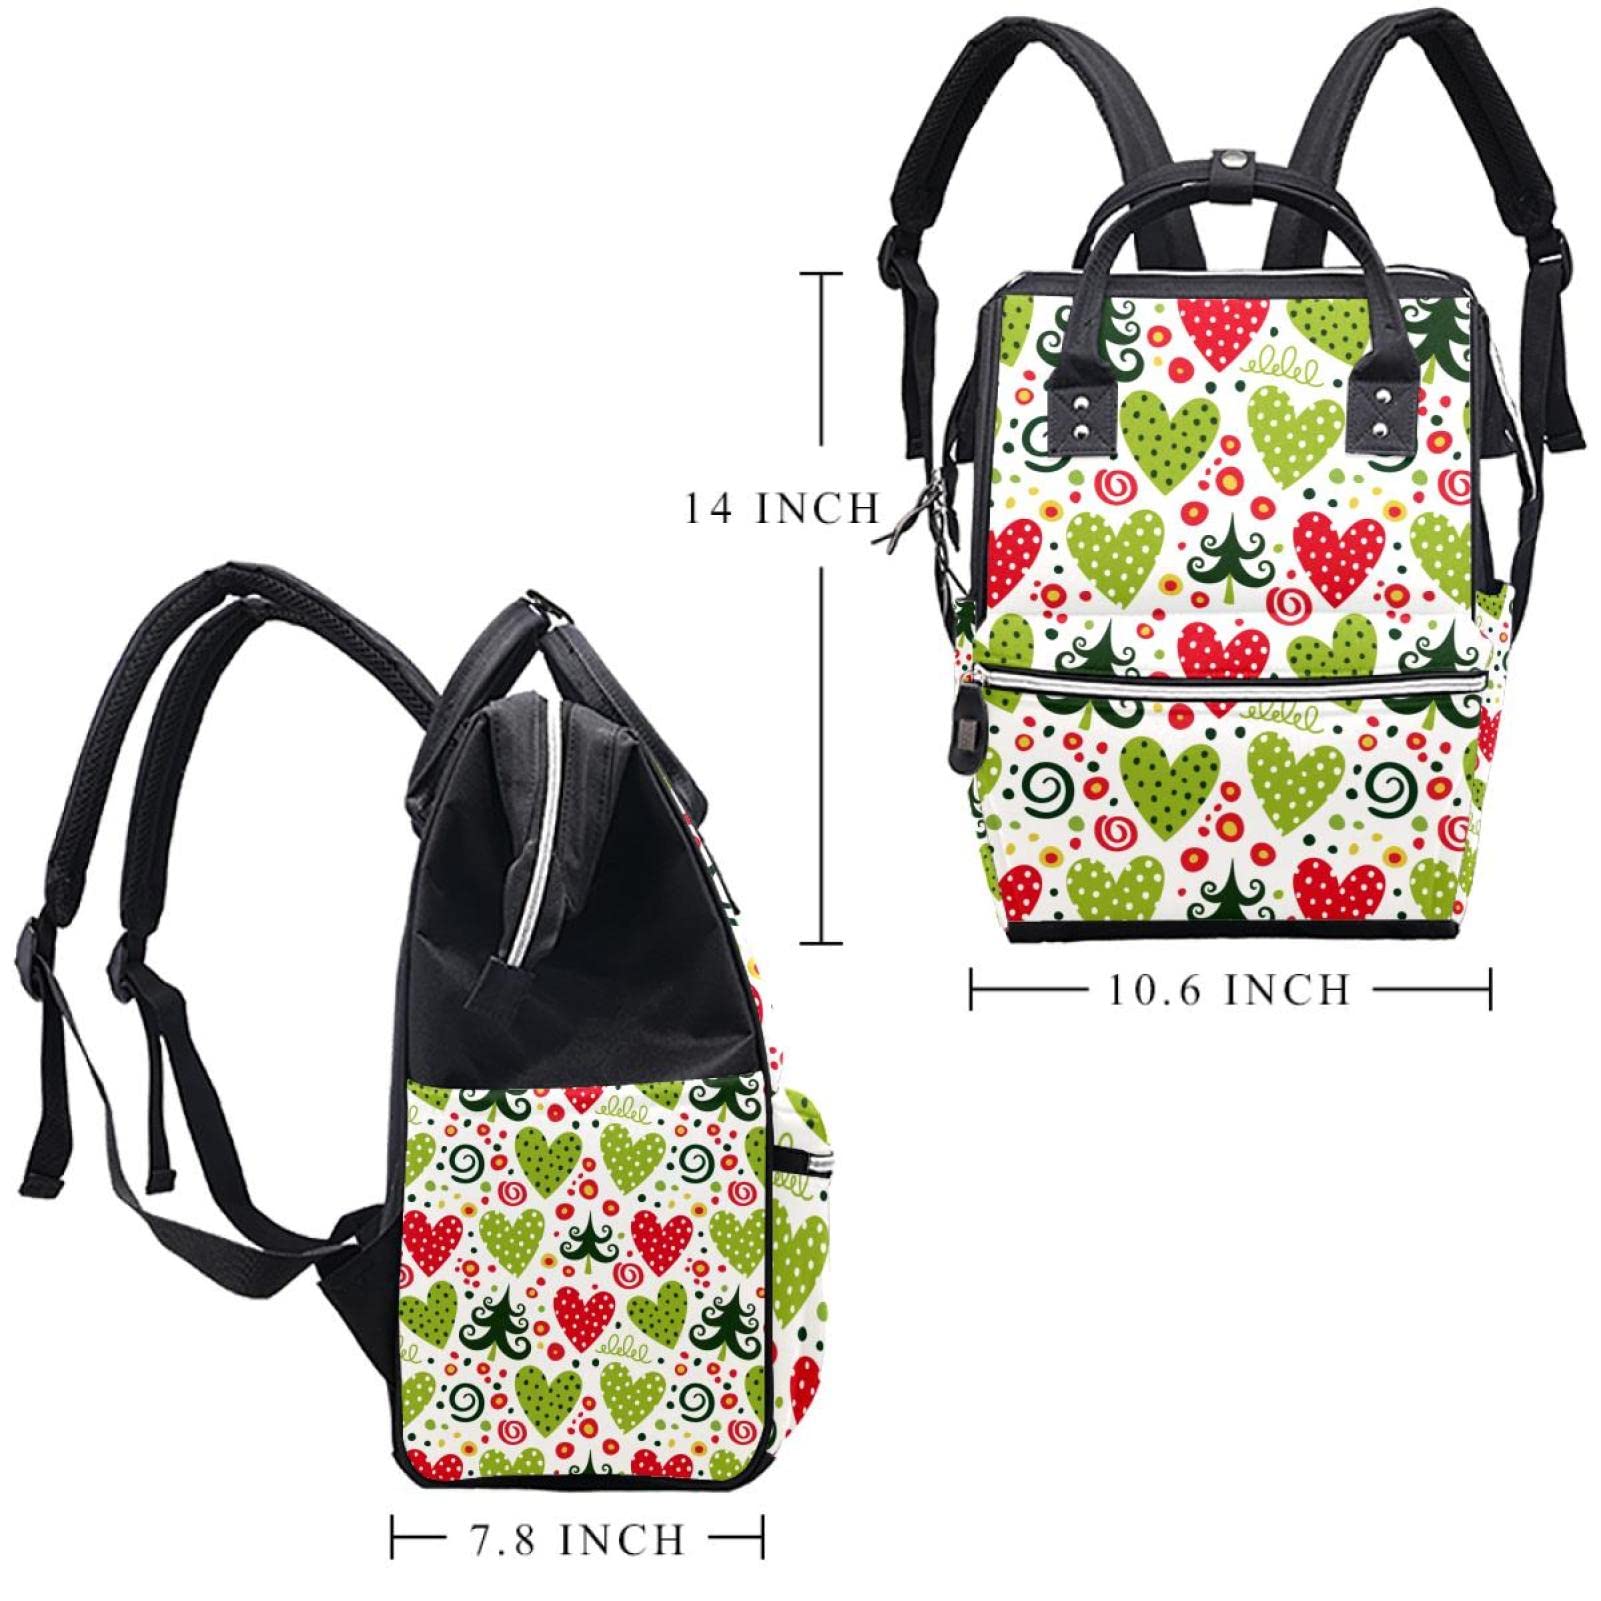 Christmas Trees Polka Dots Heart and Confetti Diaper Bag Backpack Baby Nappy Changing Bags Multi Function Large Capacity Travel Bag